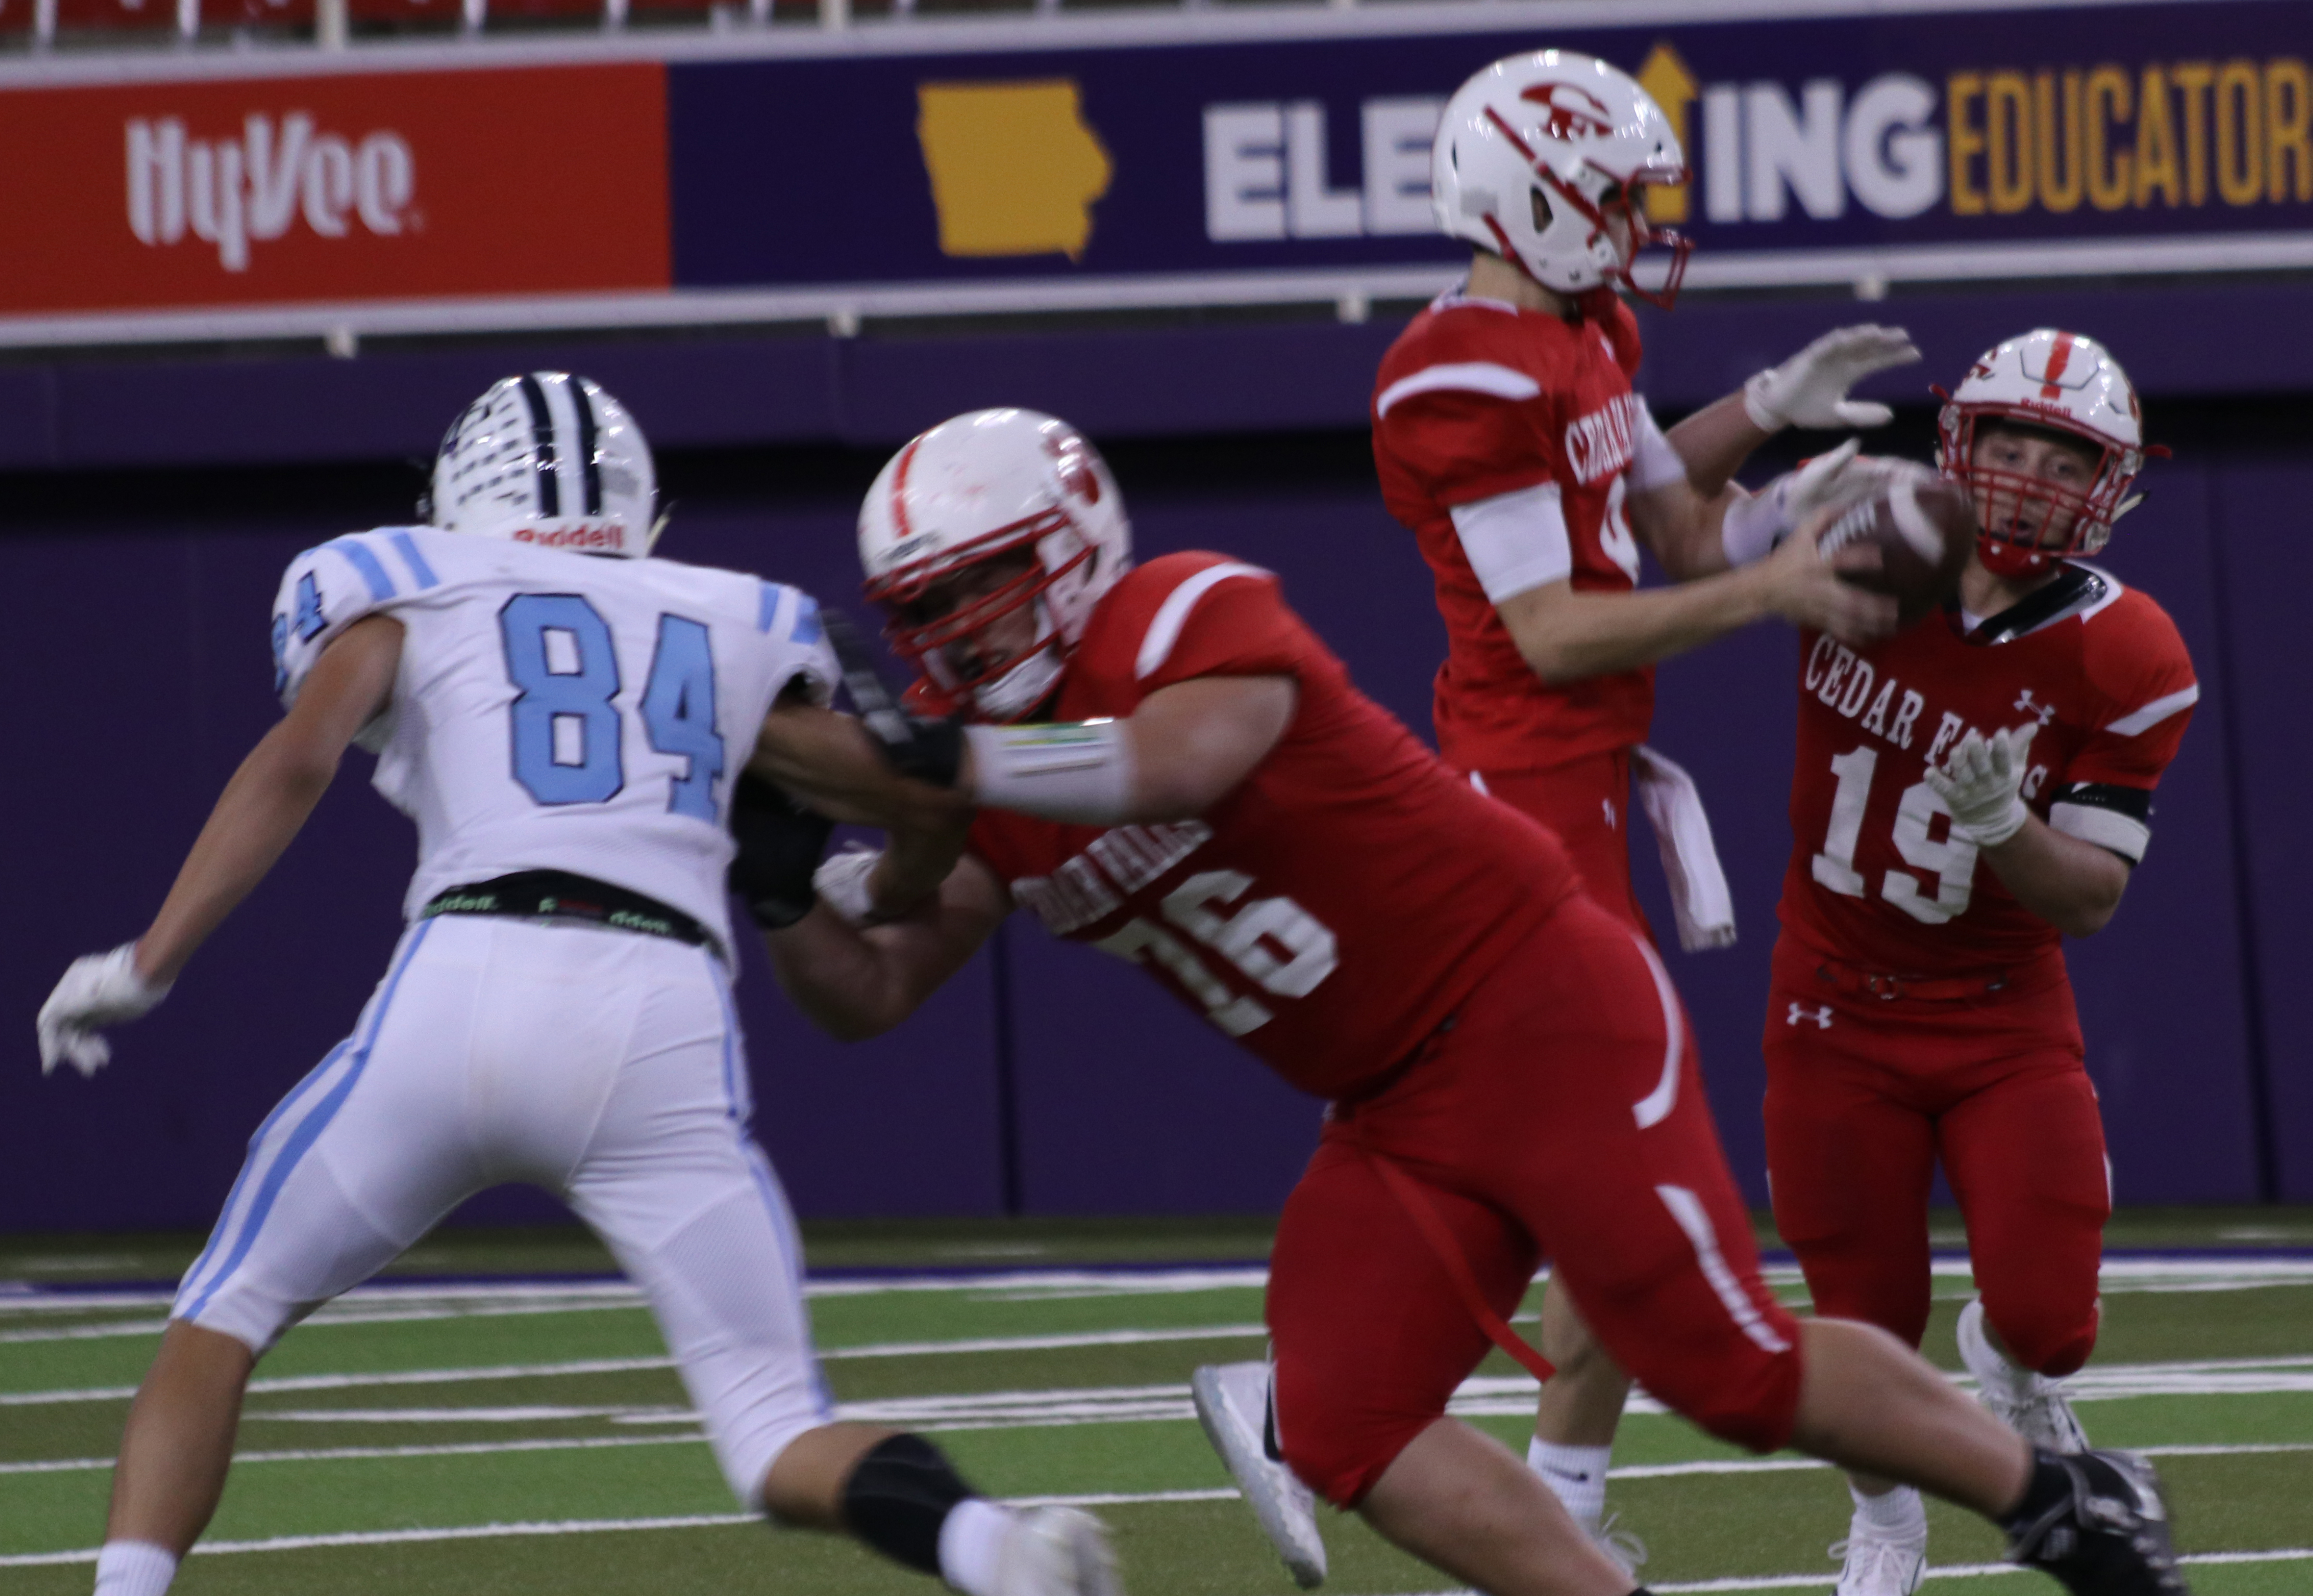 The football team beat the J-Hawks at the homecoming game at the UNI Dome on Friday, Sept. 28.